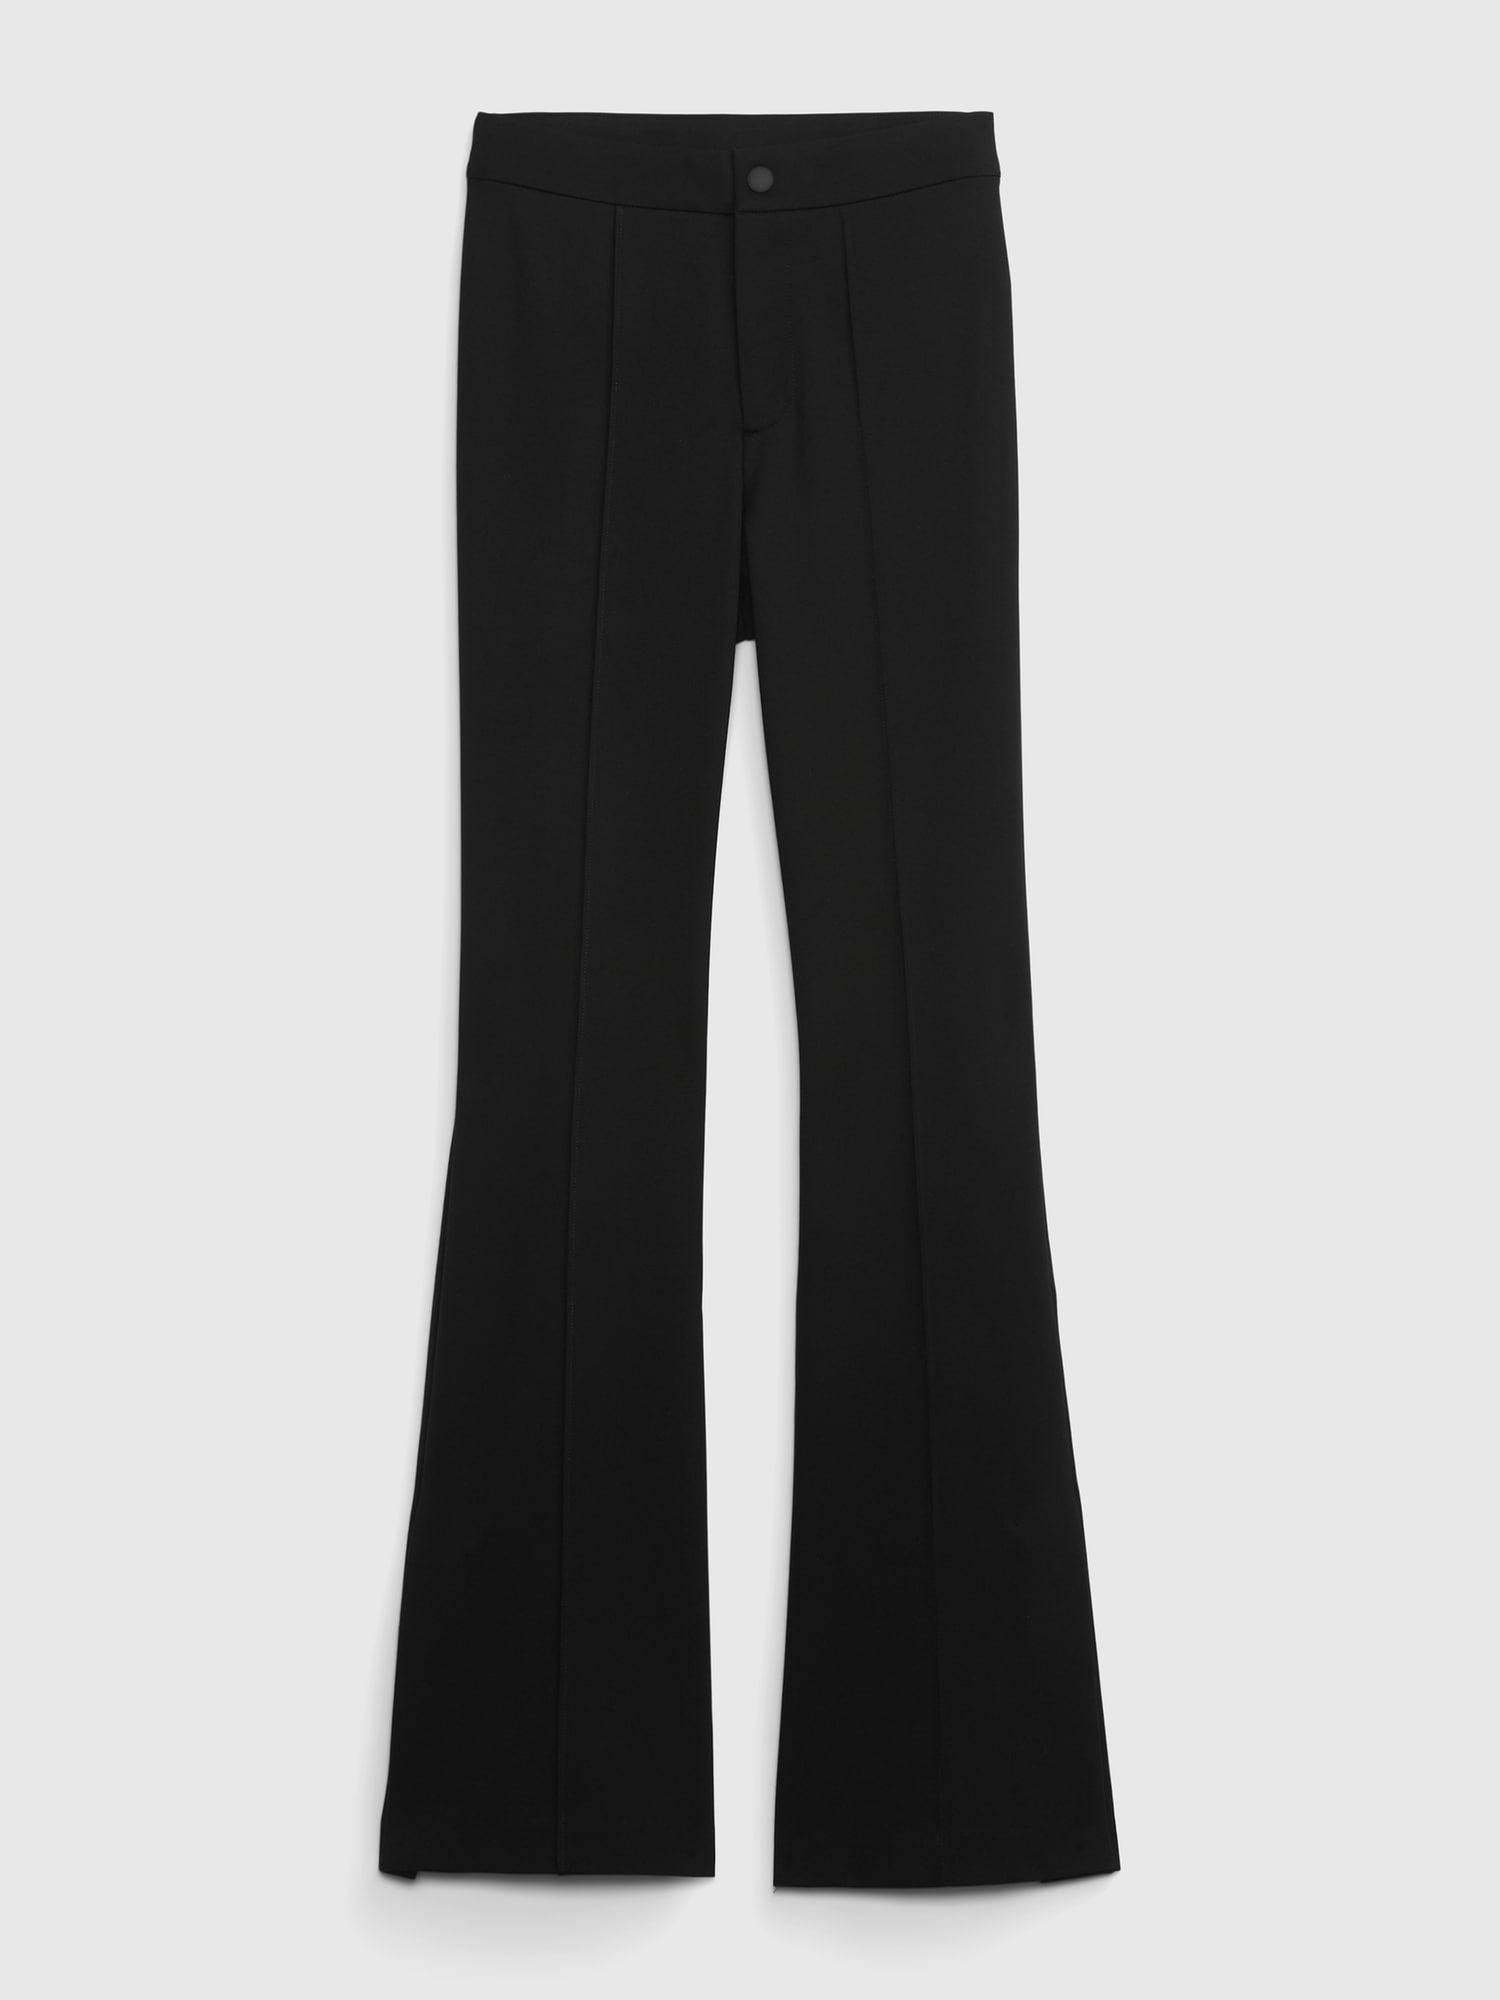 Fit & Flare Seam Front Dress Pants